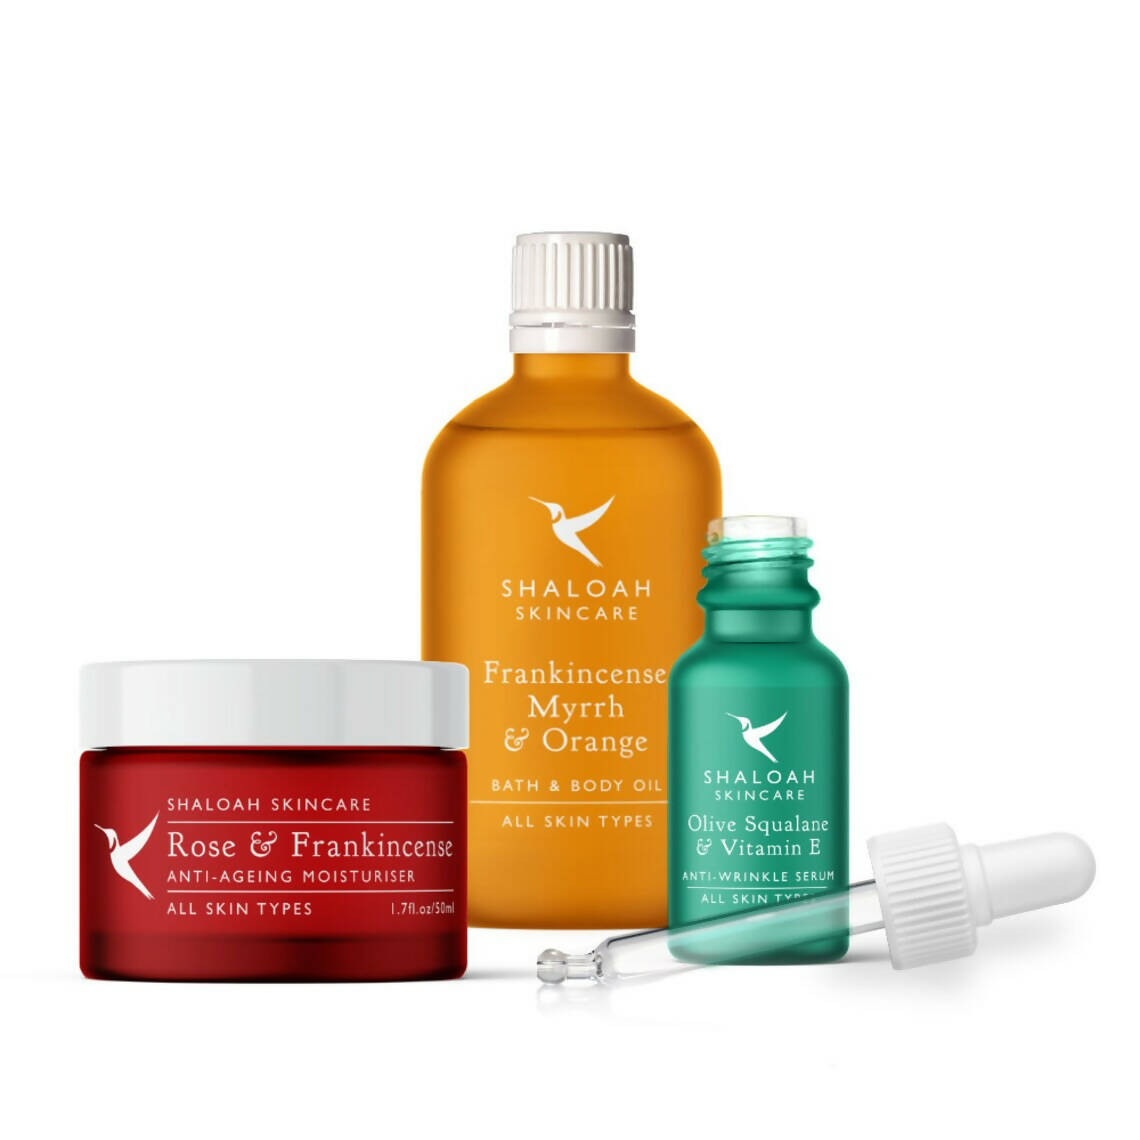 Forever young natural skincare gift set